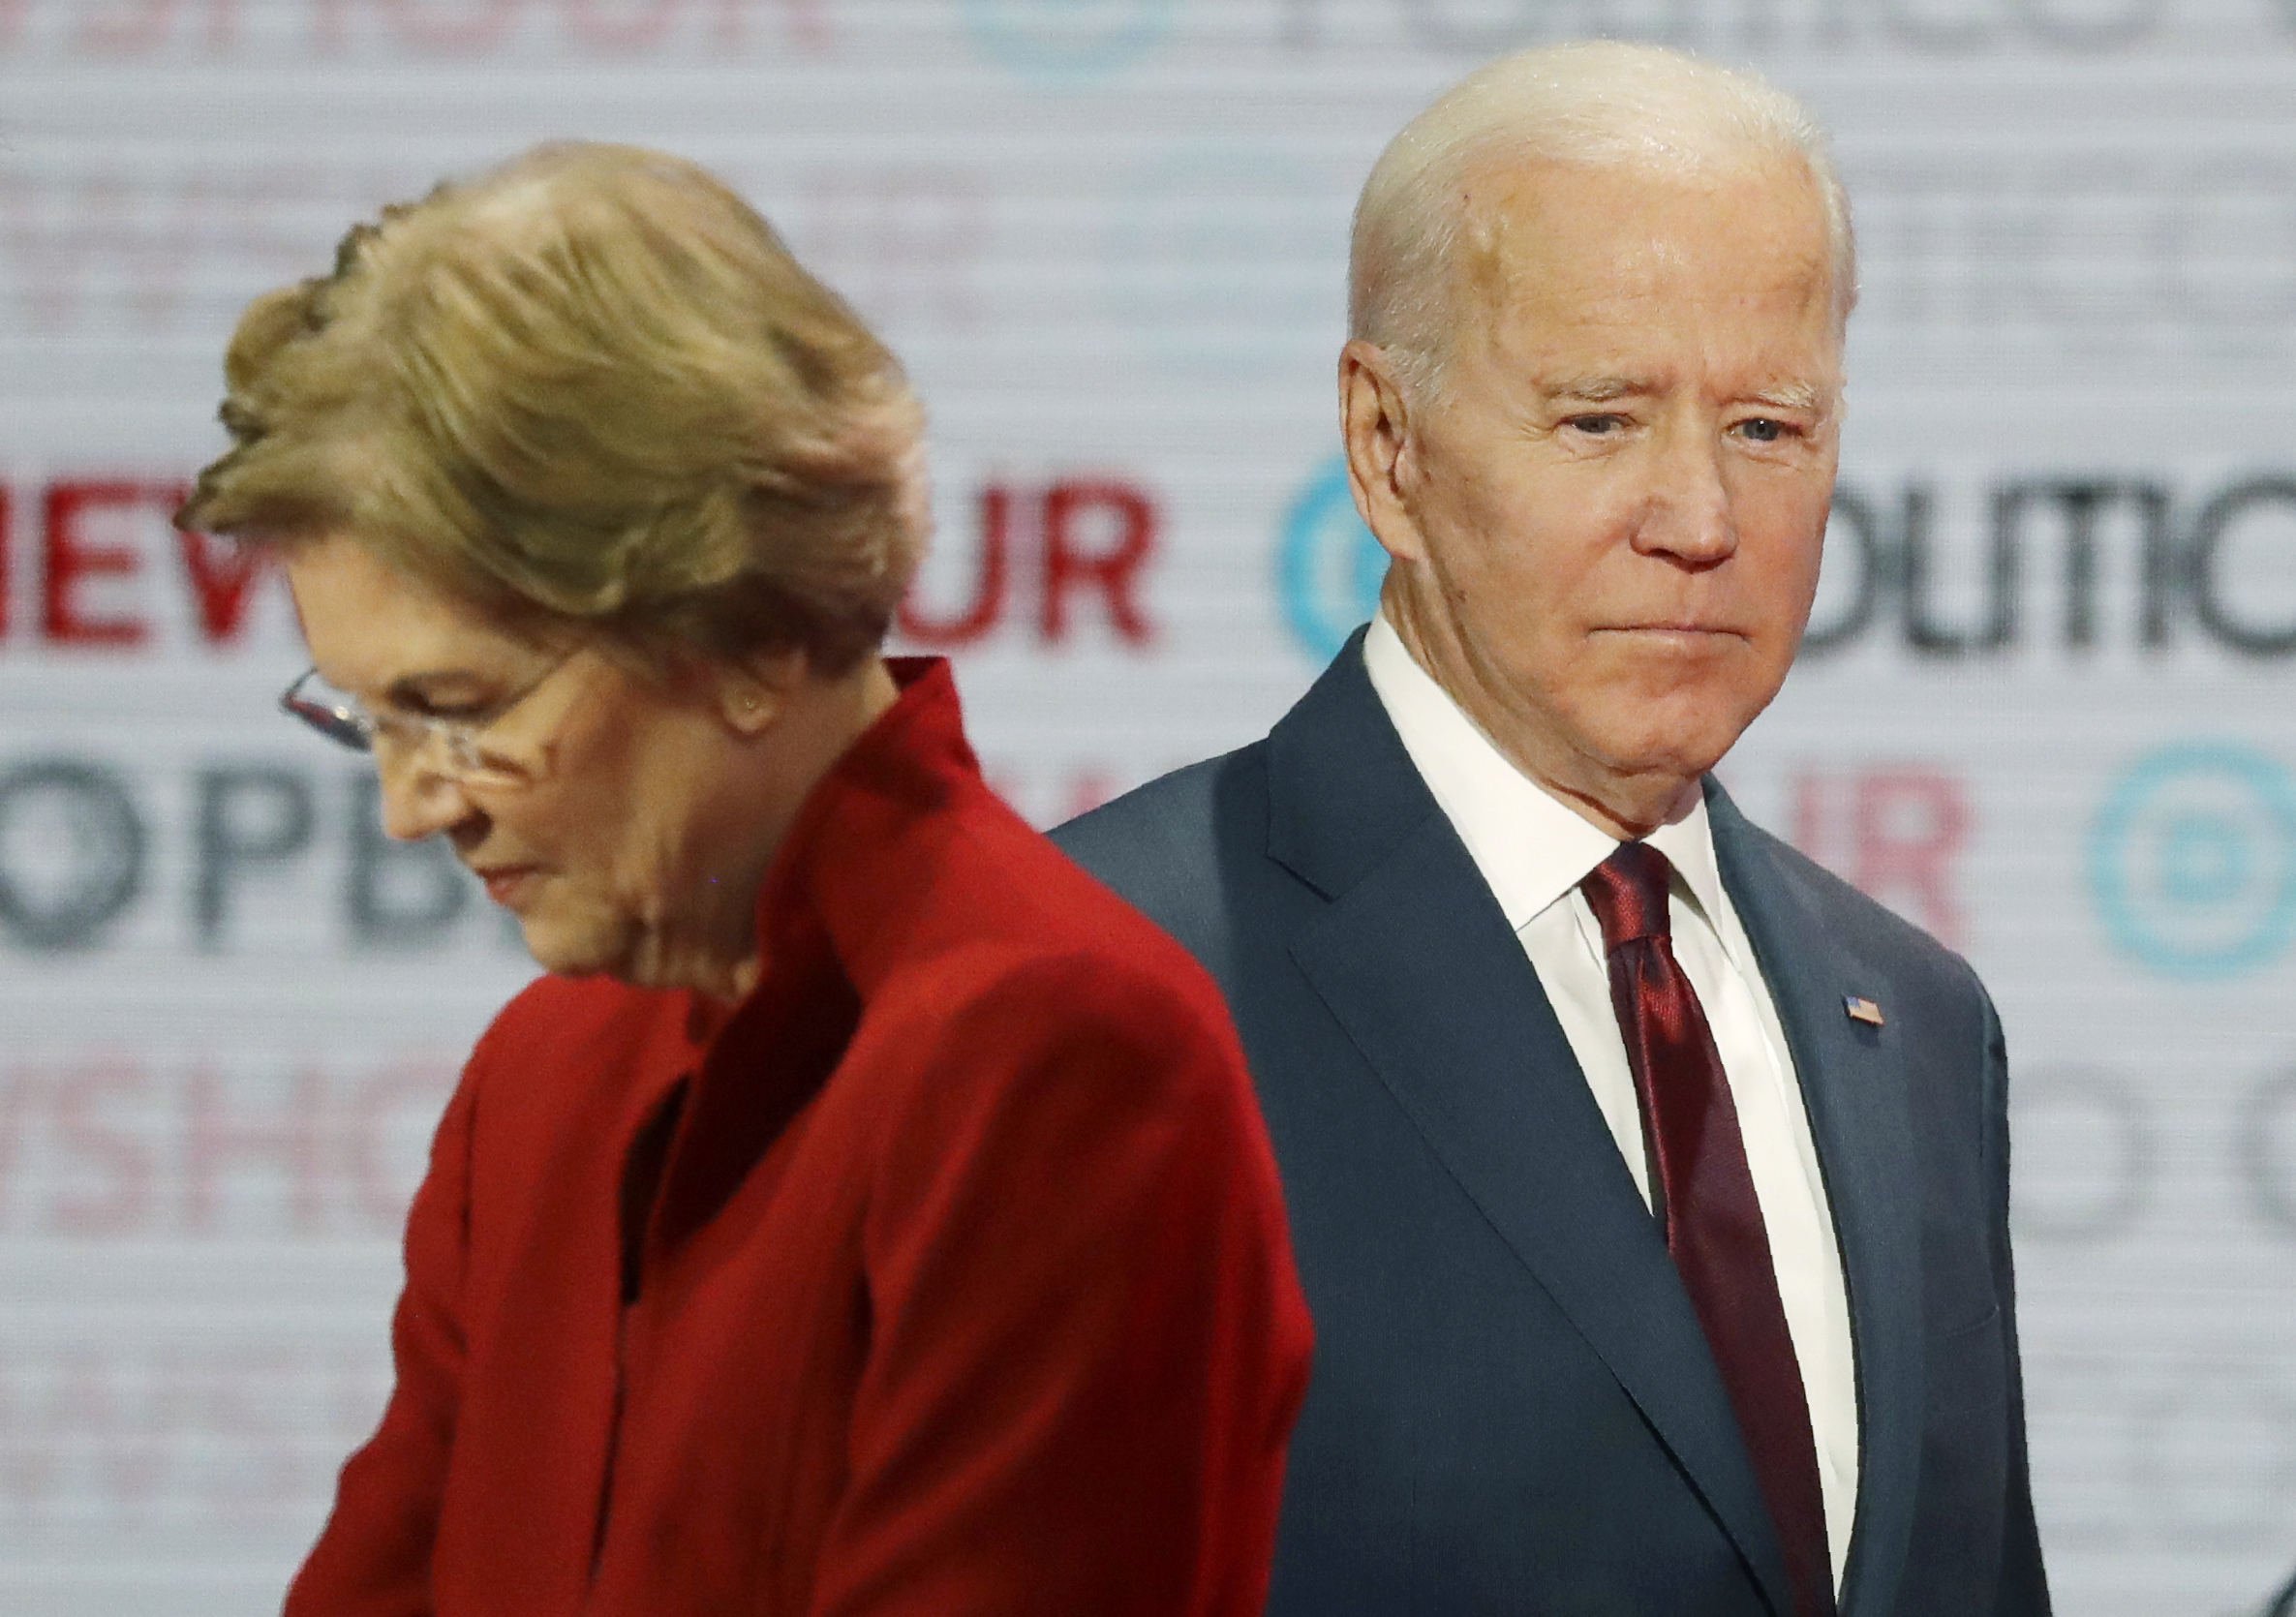 PHOTO: In this Dec. 19, 2019, file photo presumptive Democratic presidential candidates Sen. Elizabeth Warren, left, and former Vice President Joe Biden stand on stage during a break at a presumptive Democratic presidential primary debate in Los Angeles.